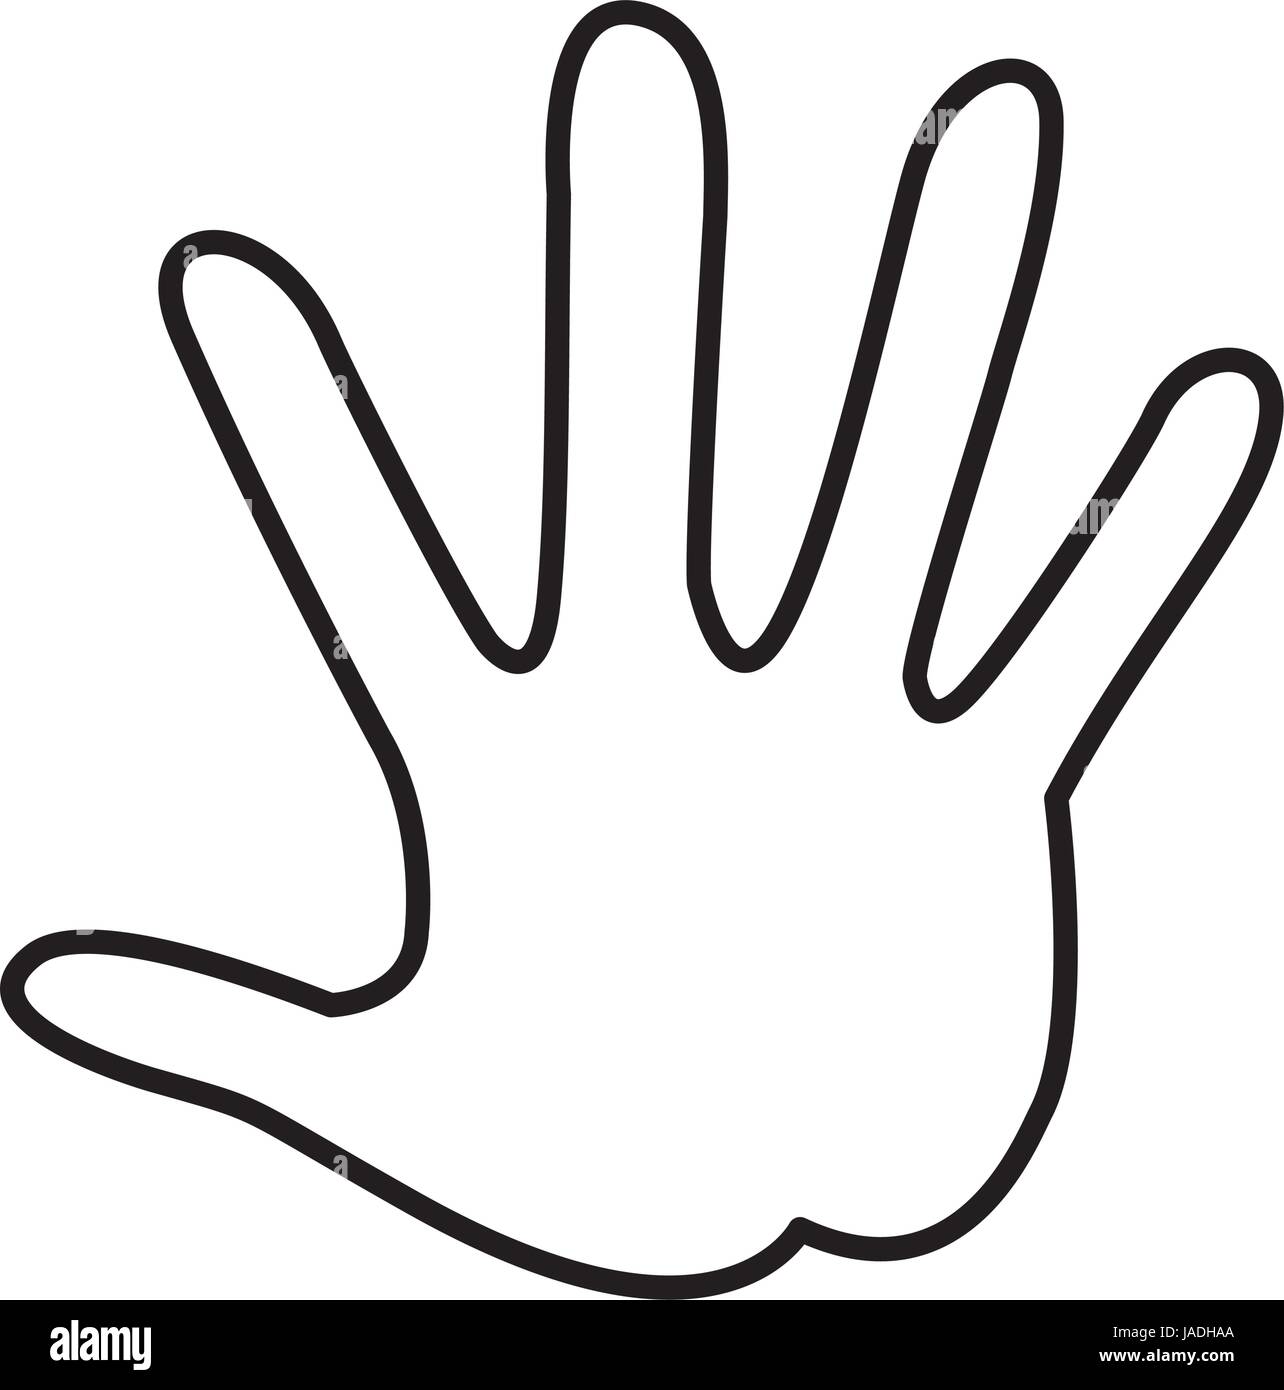 outlined hand showing five finger palm image Stock Vector Image